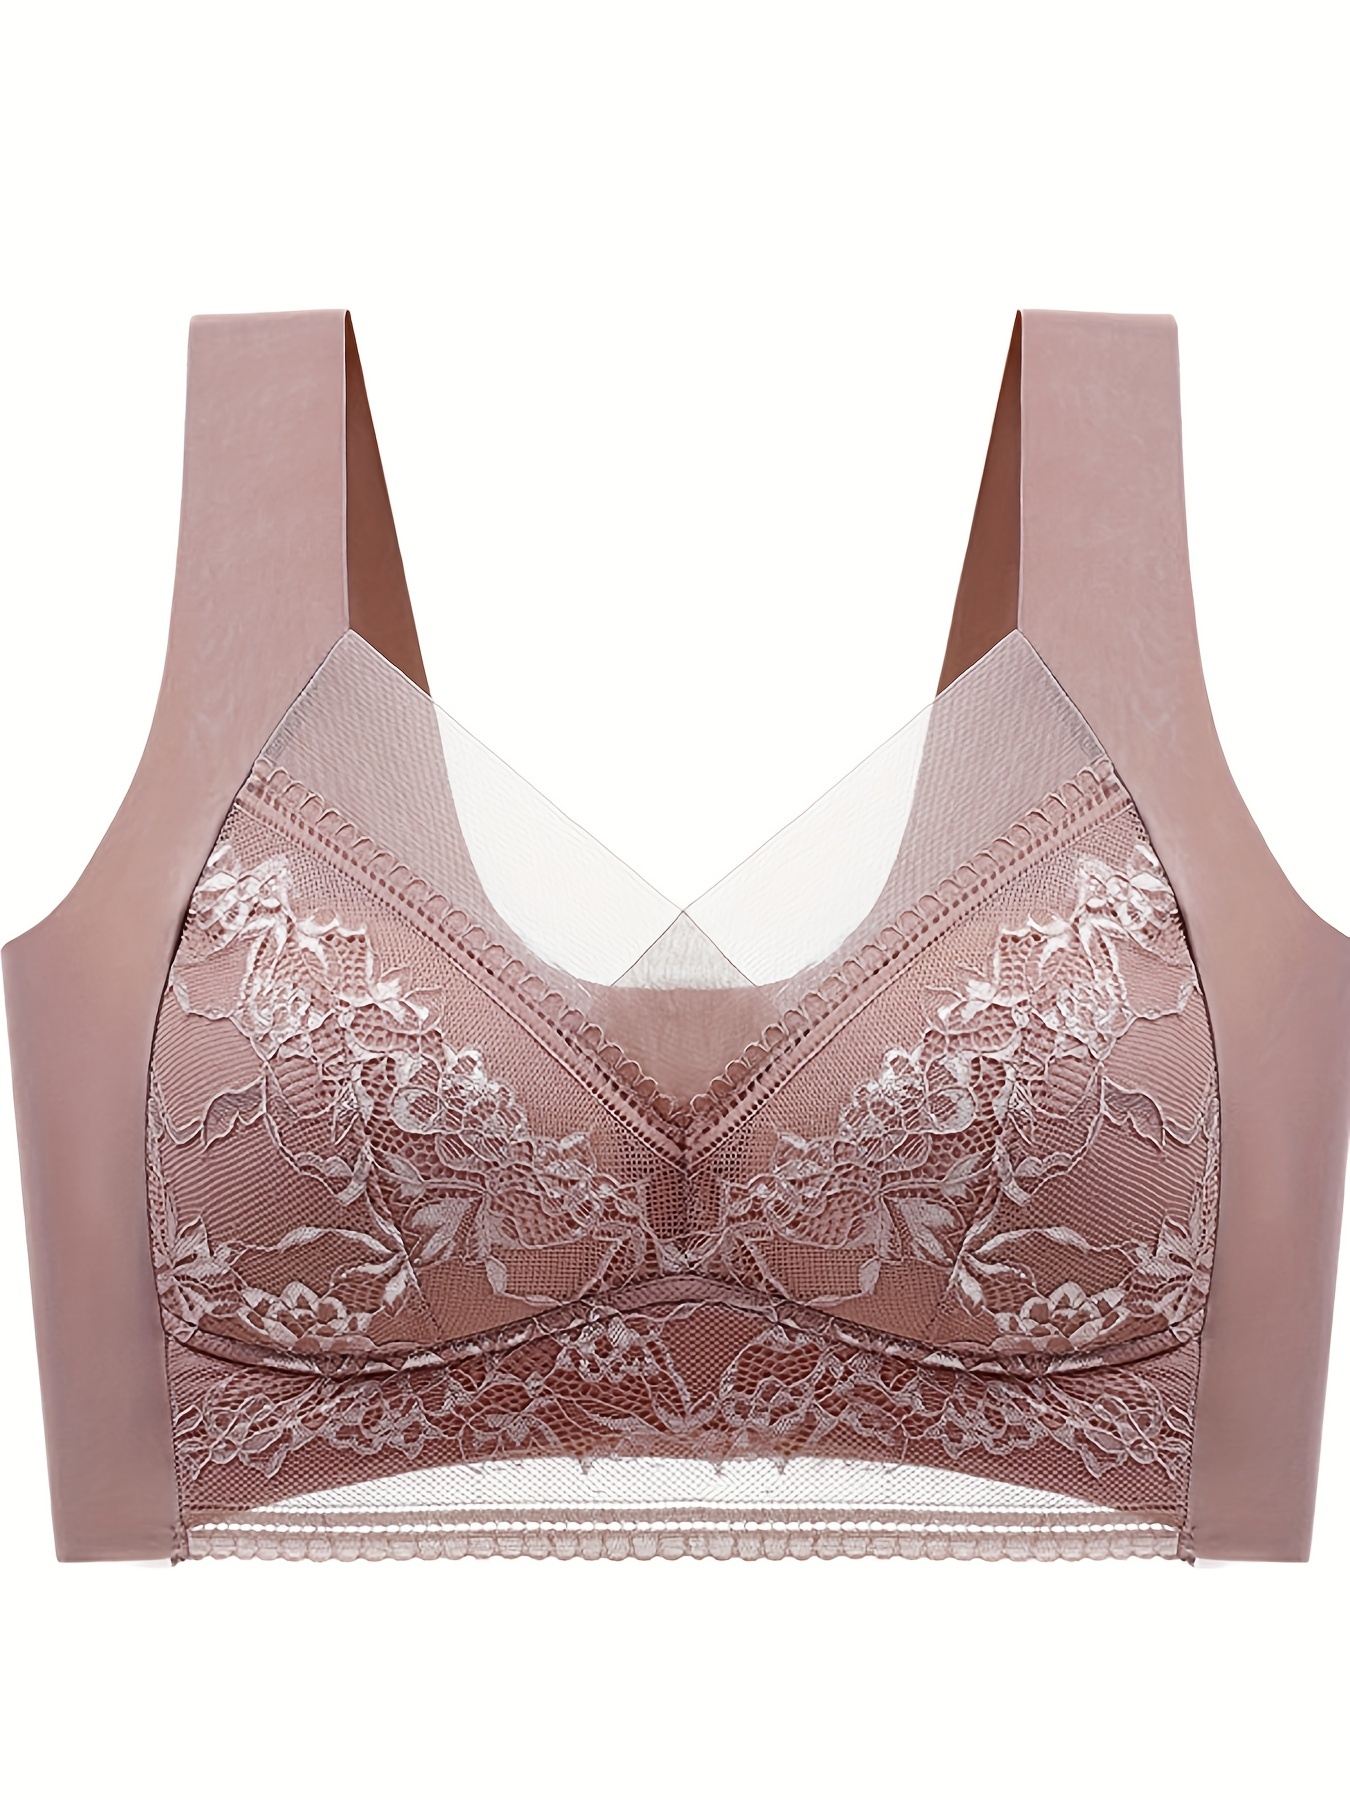 bra with mesh lace, with a wonderful design - Ovitio